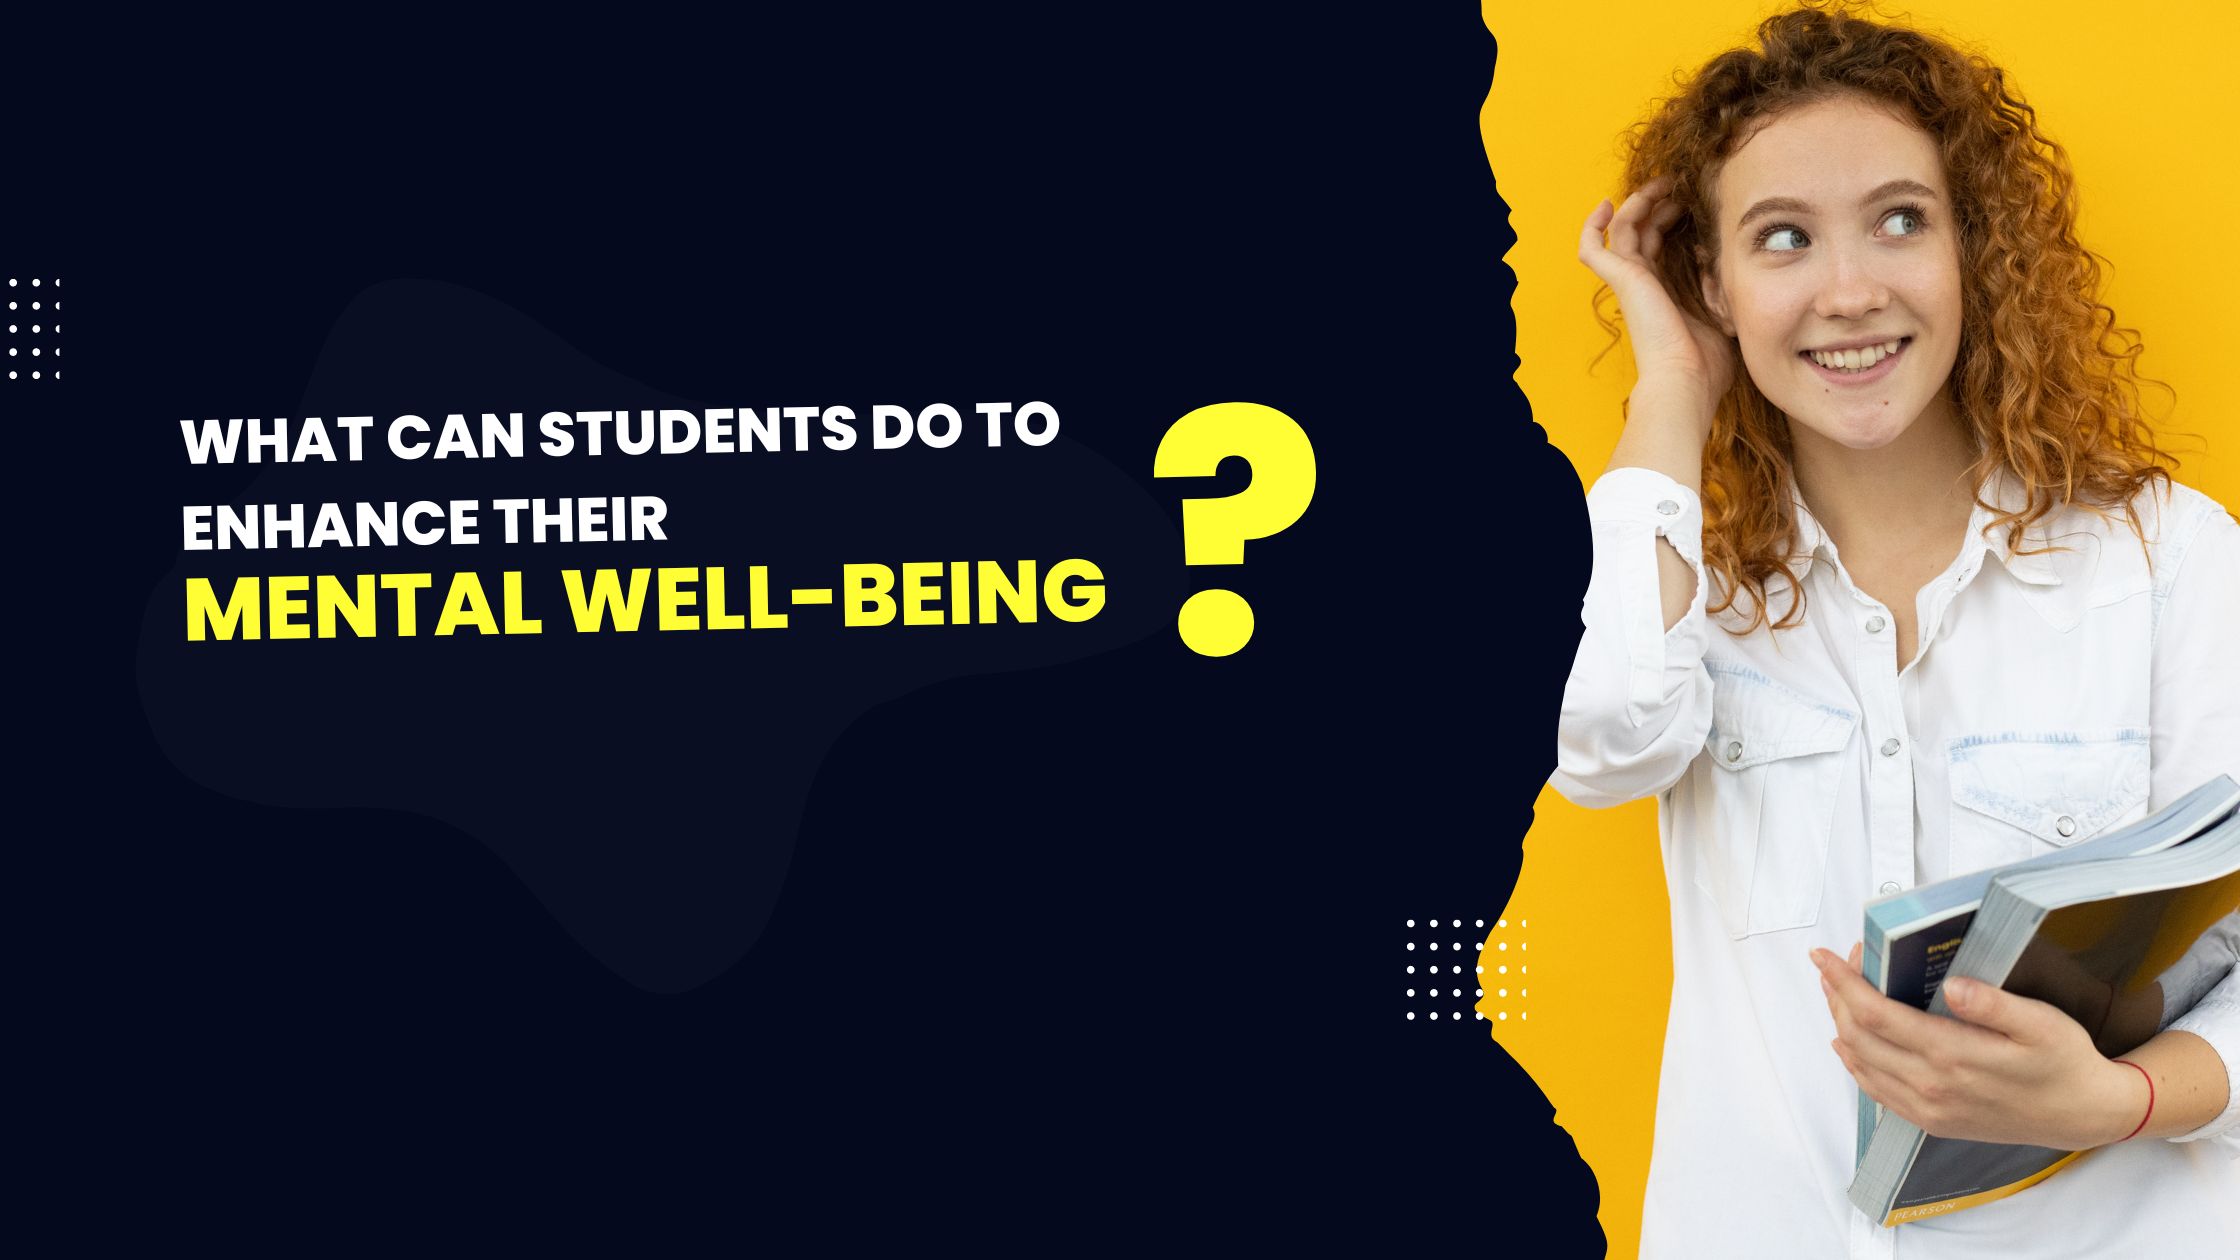 What Can Students Do to Enhance Their Mental Well-Being